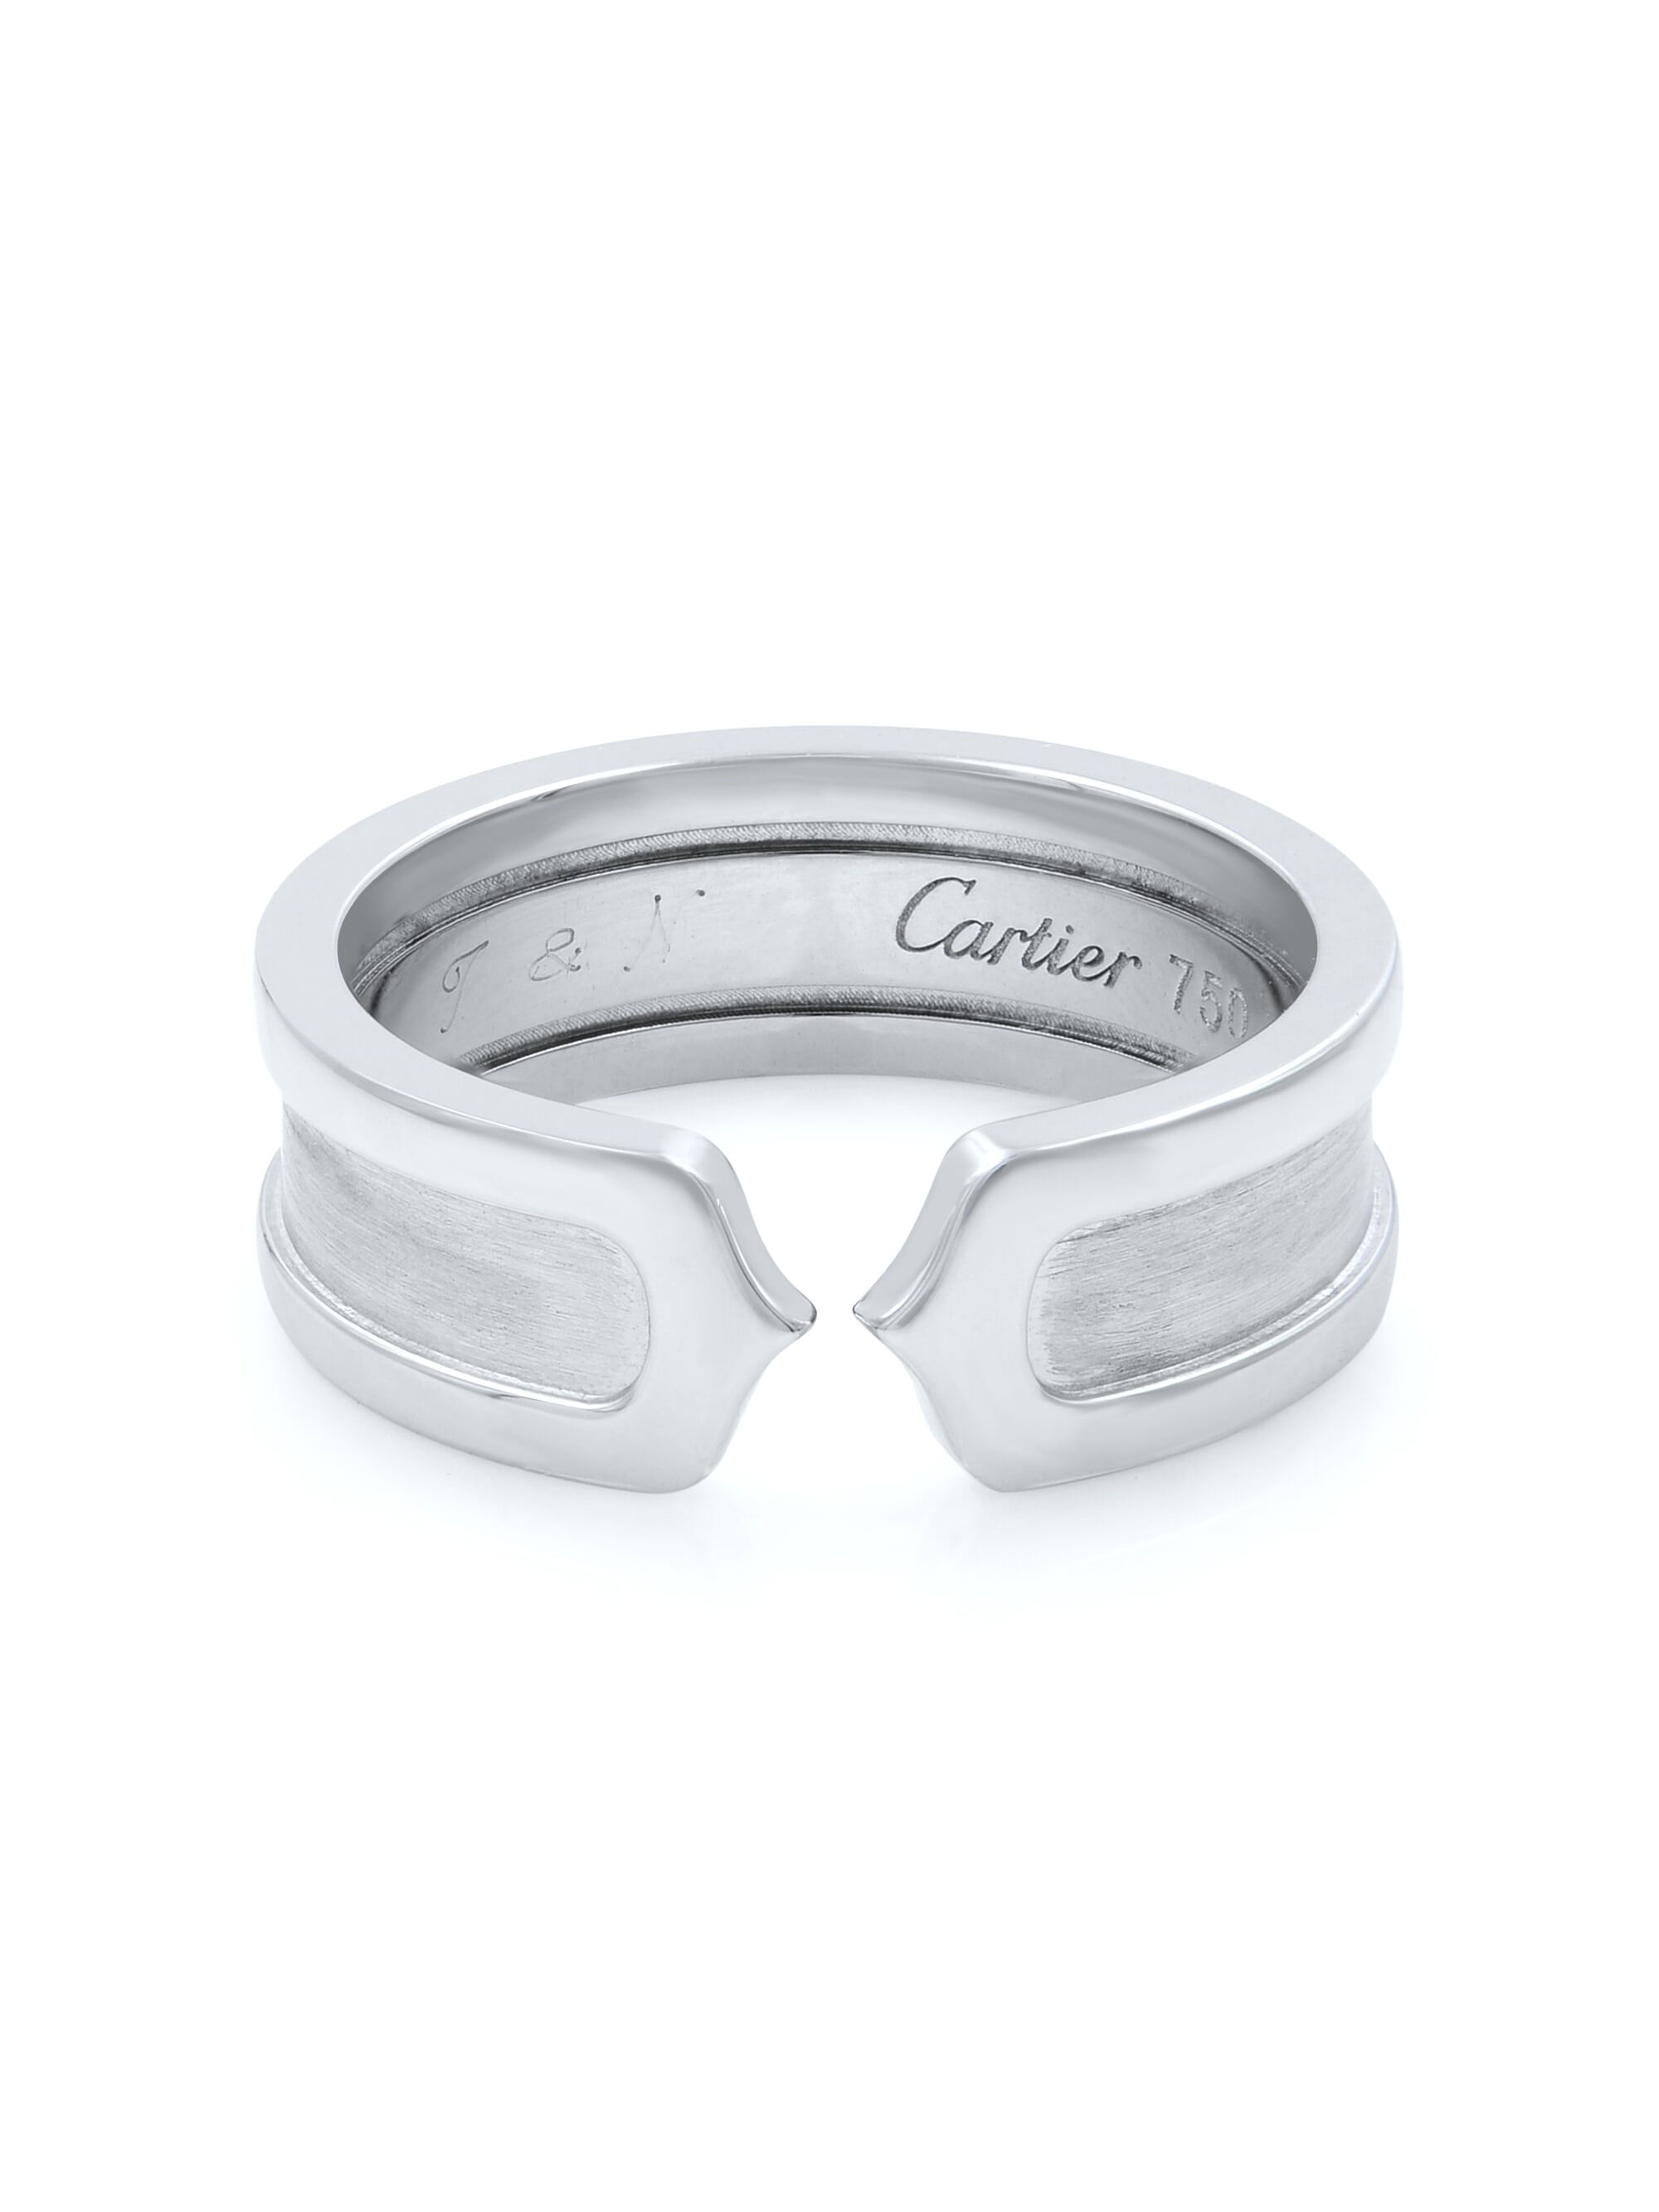 cartier ring white gold